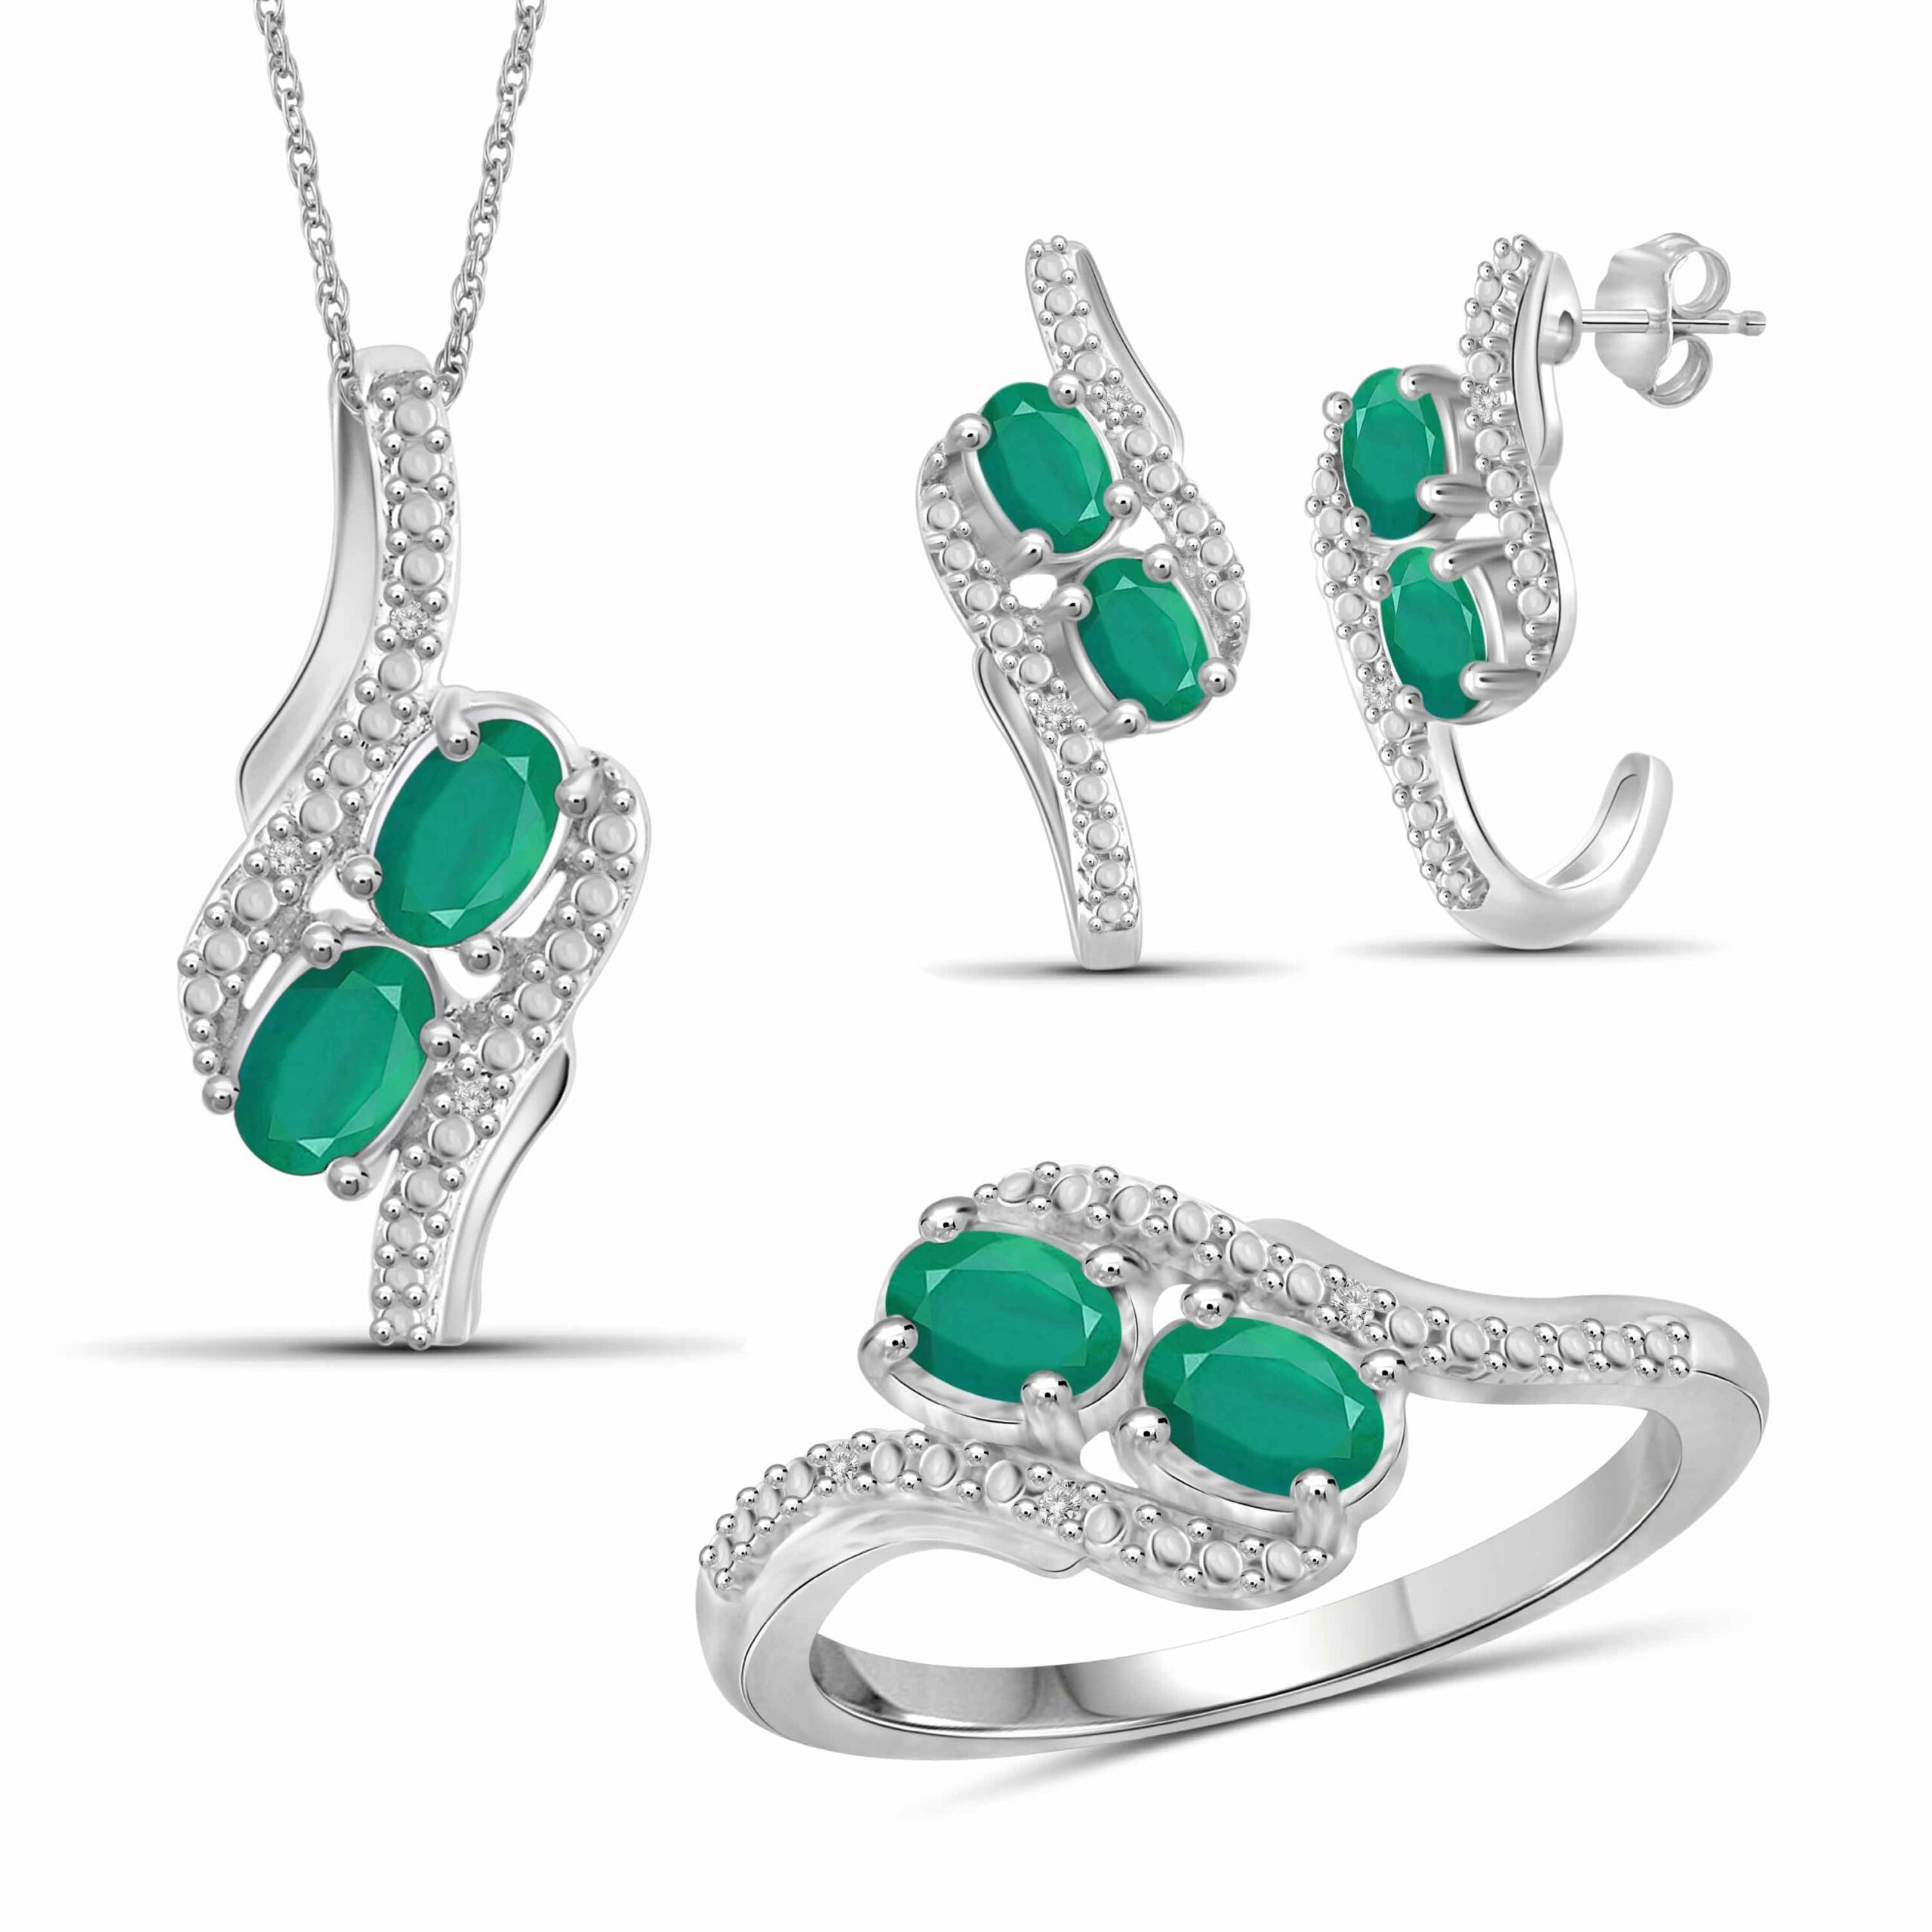 Only 45.00 usd for JewelonFire 1.80 Carat T.G.W. Emerald And 1/20 Carat  T.W. White Diamond Sterling Silver 3 Piece Jewelry Set - Assorted Colors  Online at the Shop